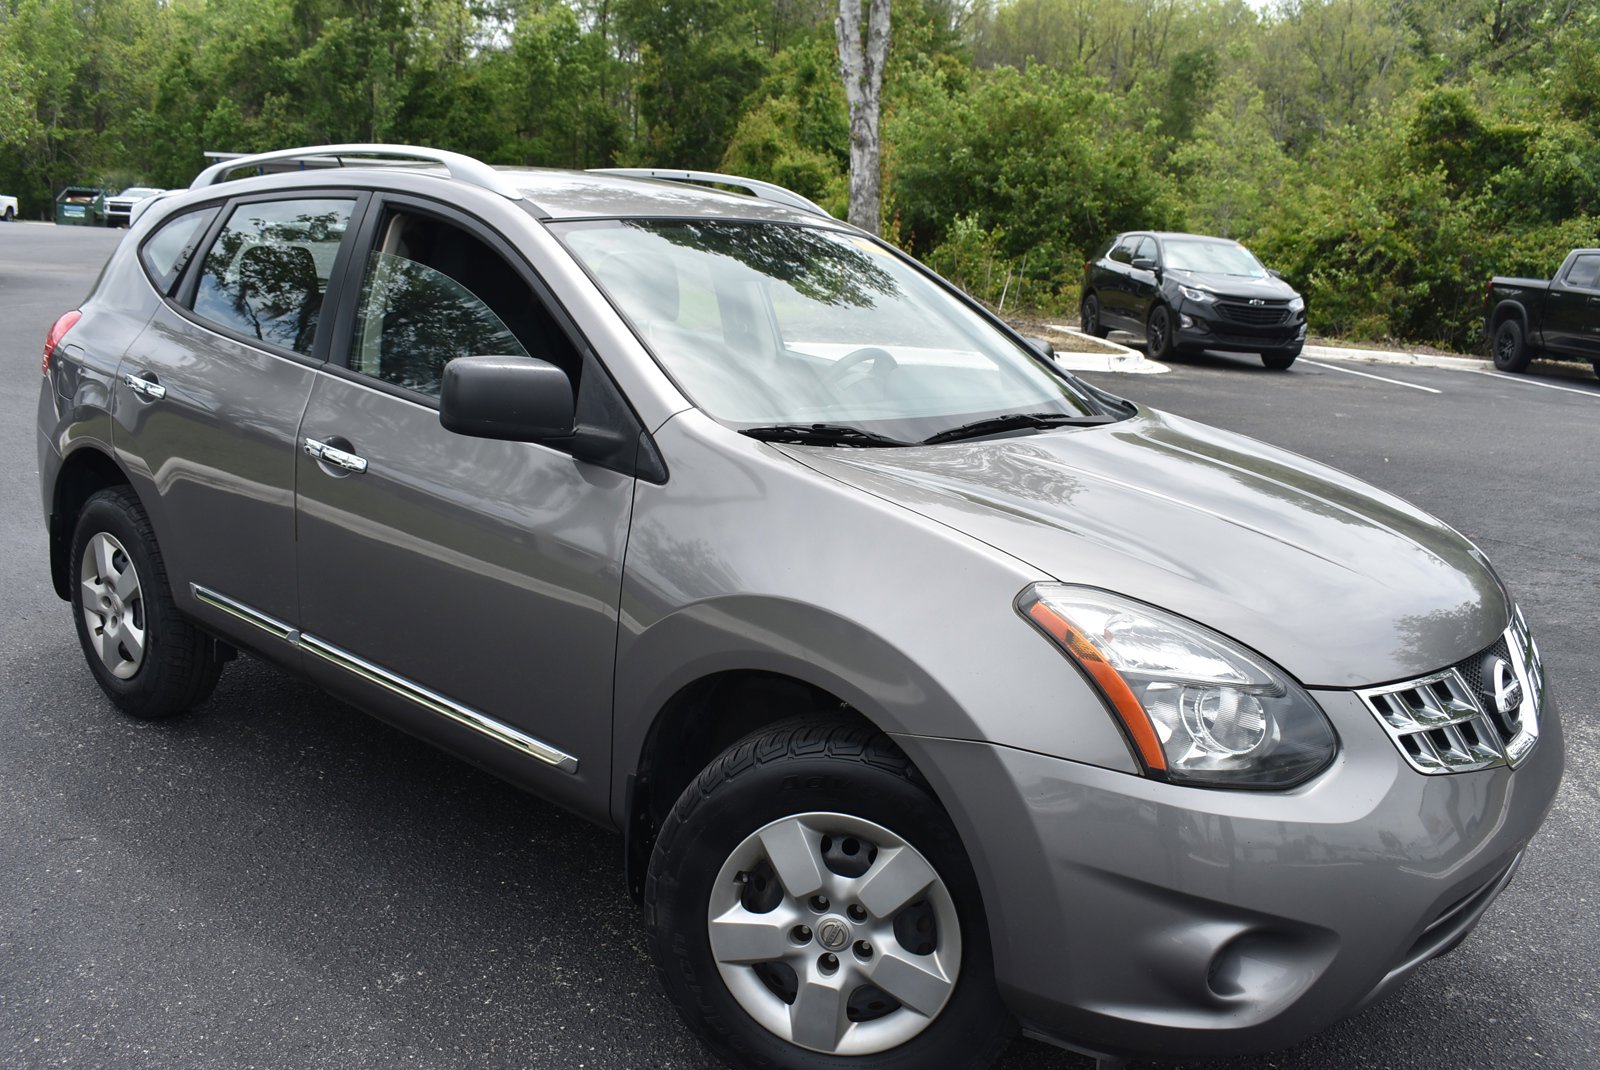 Pre-Owned 2015 Nissan Rogue Select S SUV in Merriam #P05079B | Hendrick  Chevrolet Shawnee Mission